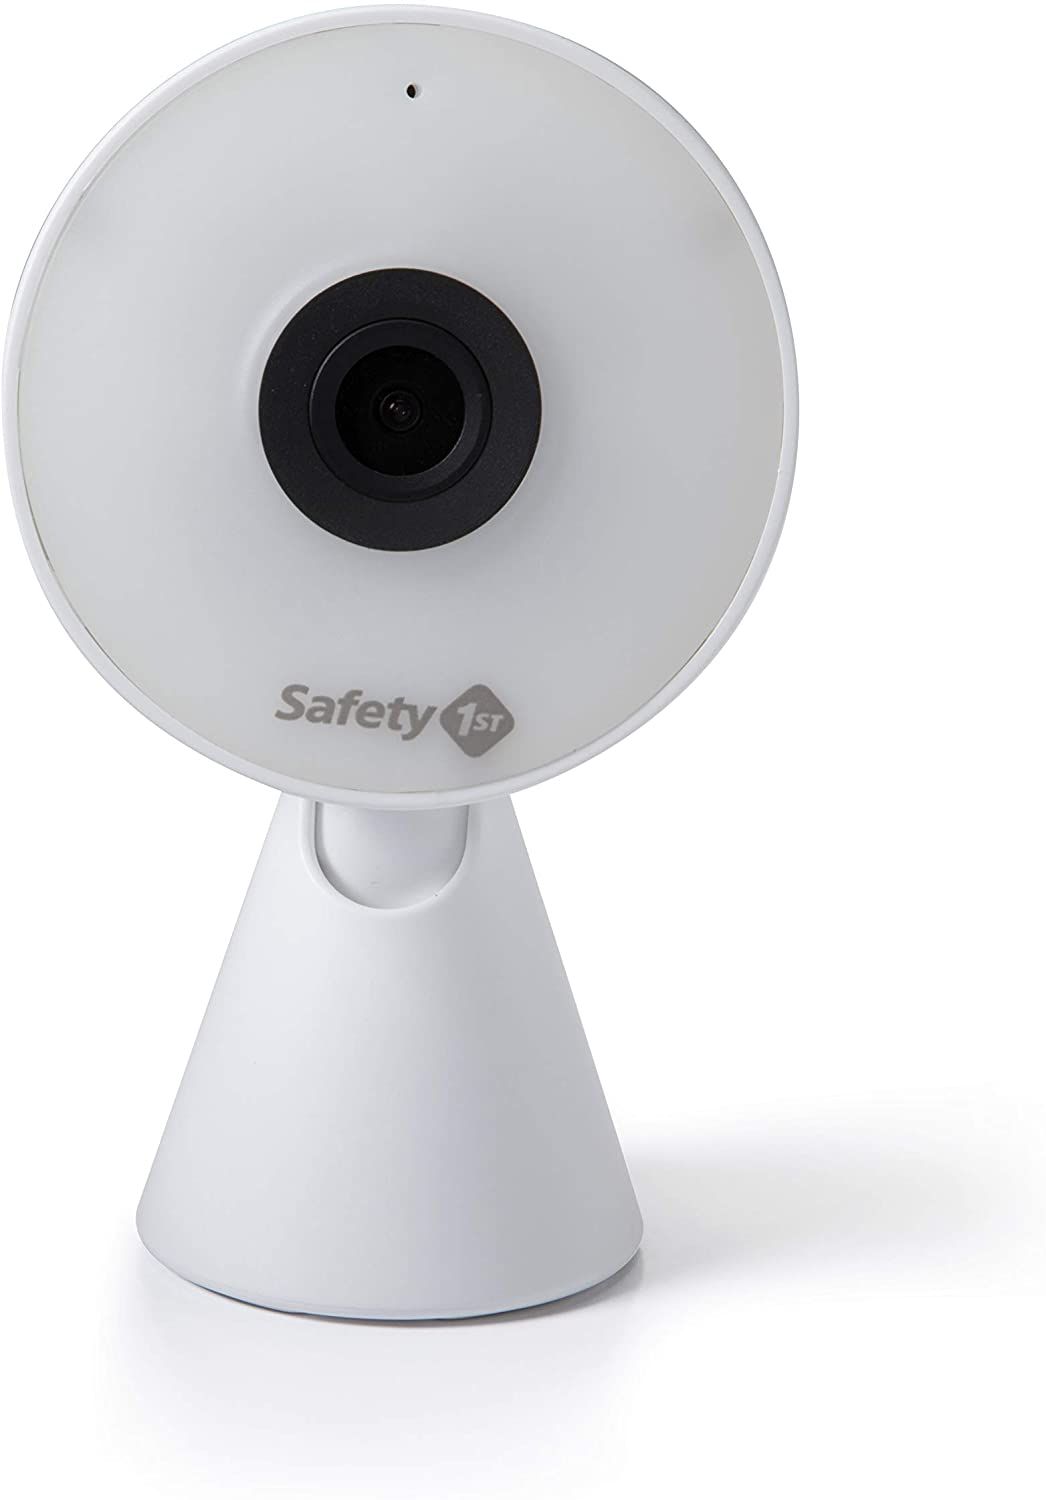 Safety 1st HD WiFi Streaming Baby Monitor camera